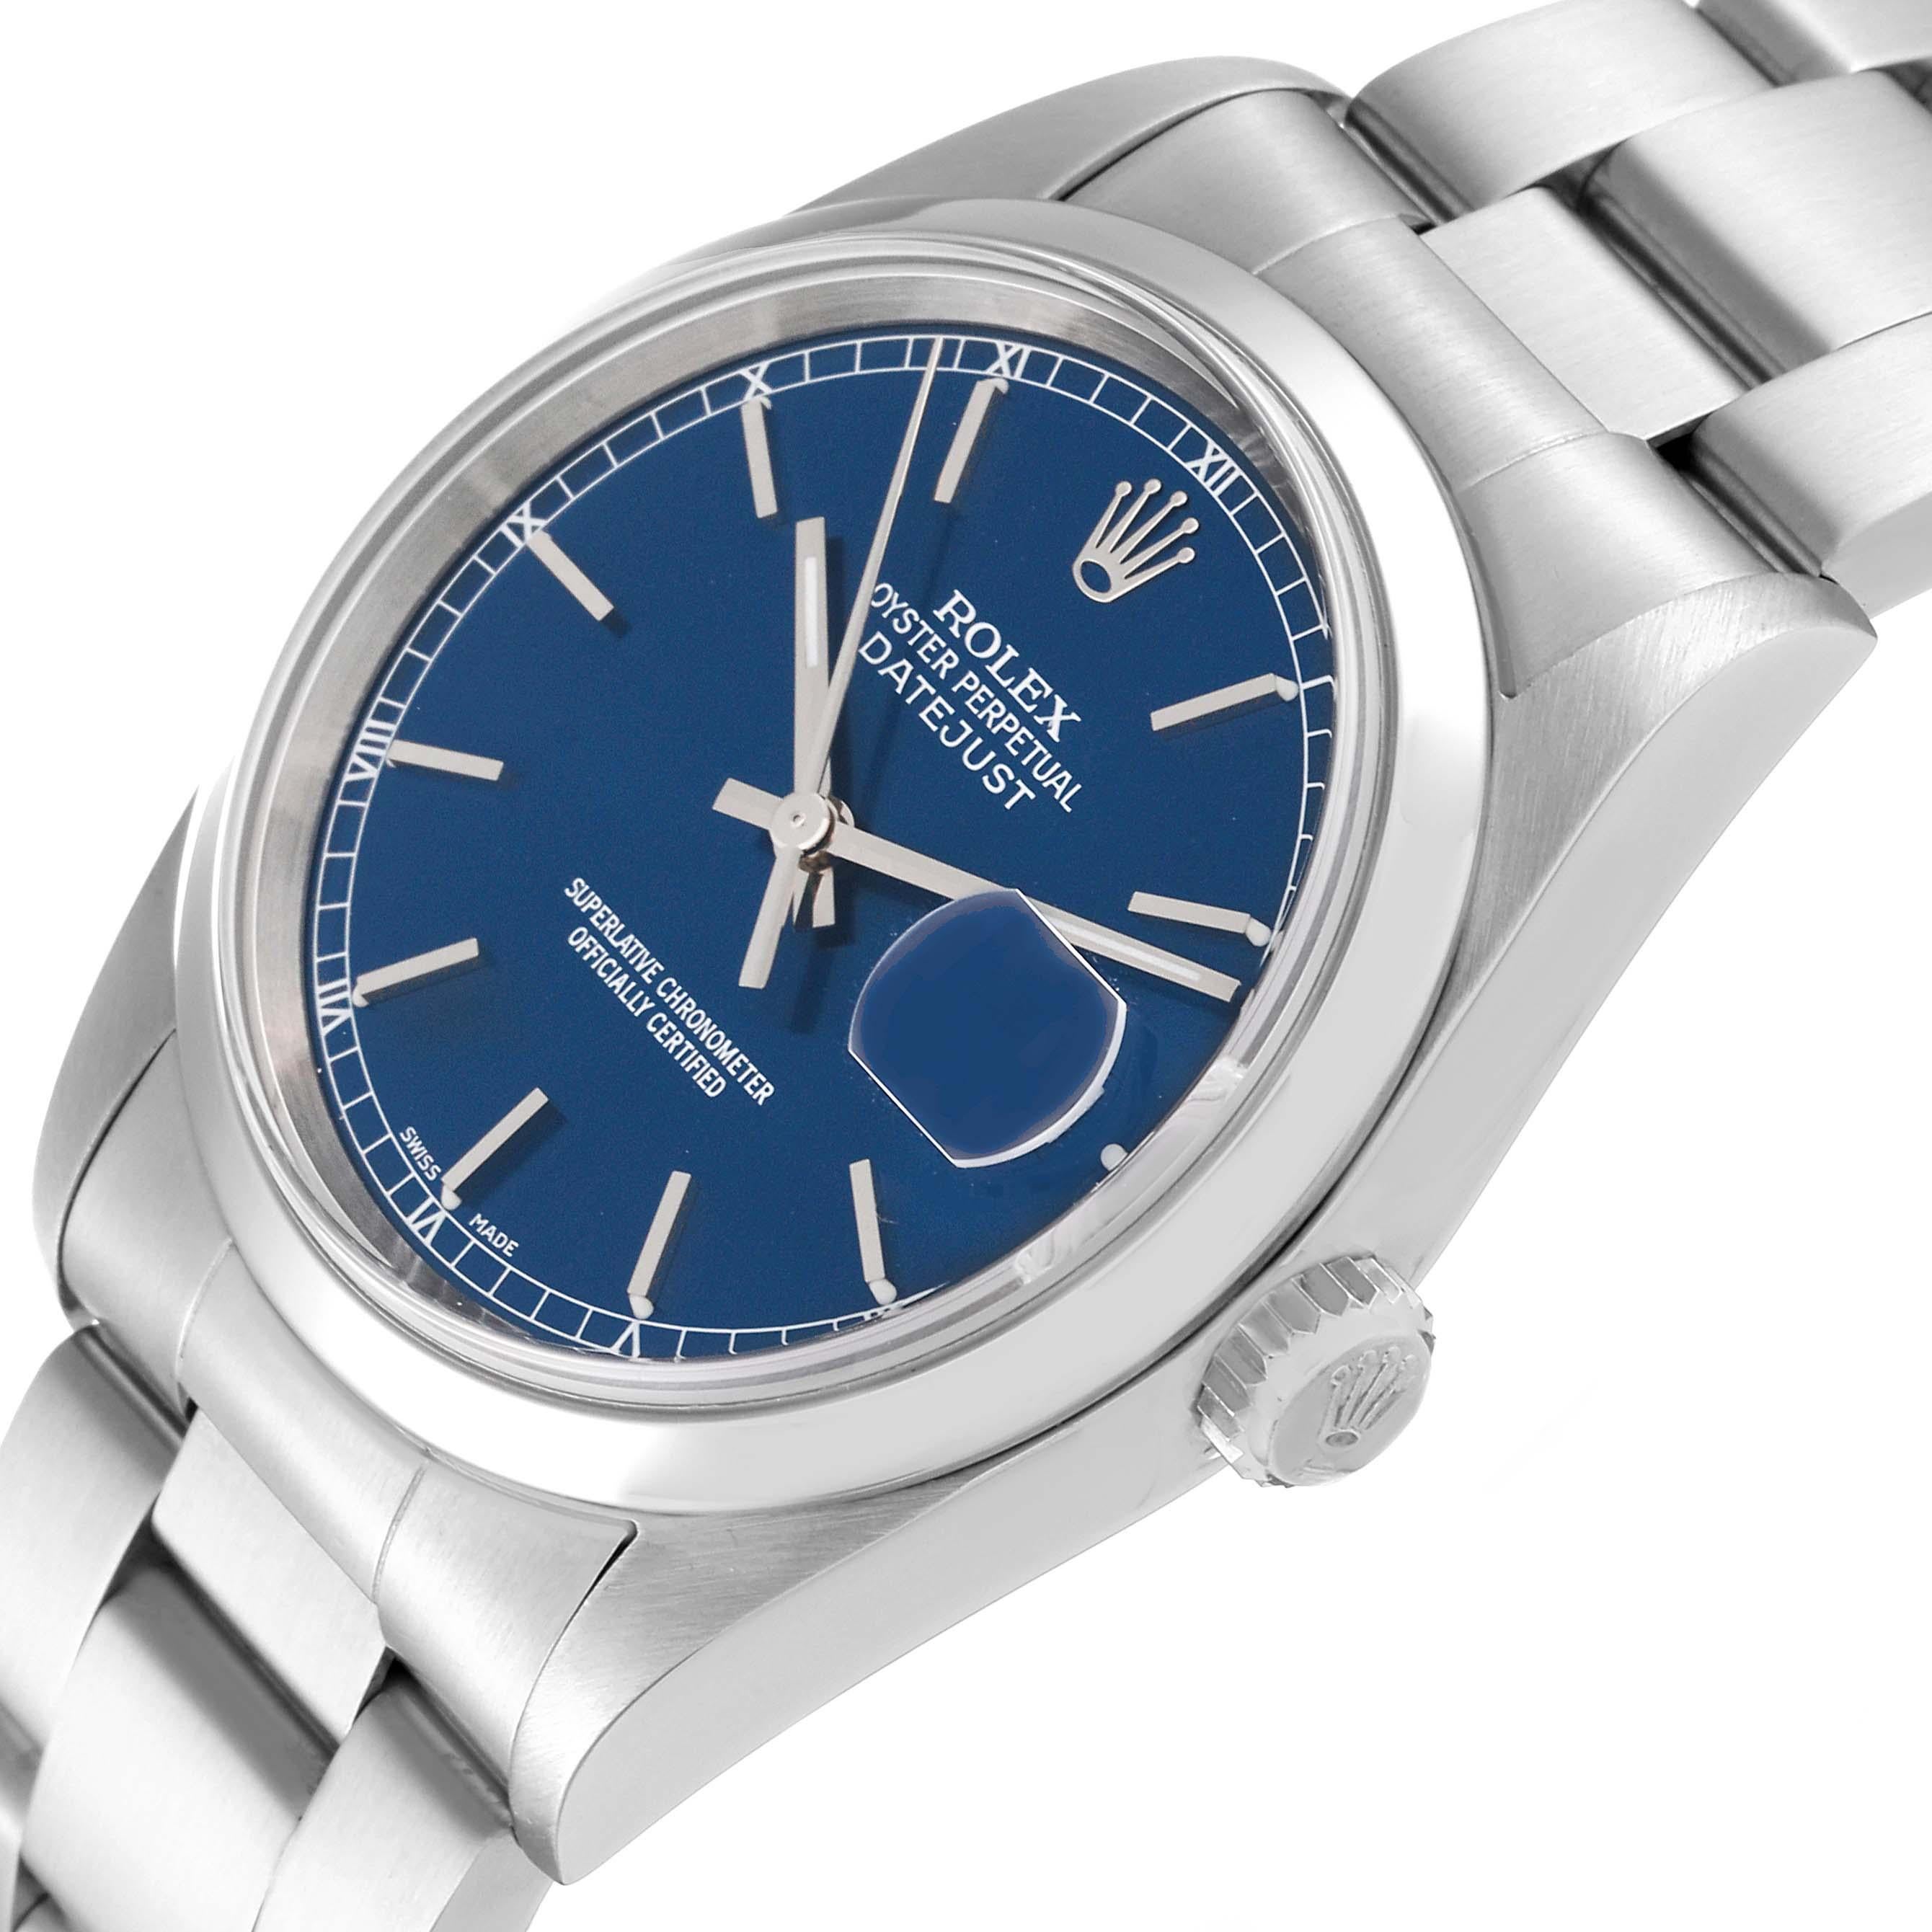 Men's Rolex Datejust Blue Dial Smooth Bezel Steel Mens Watch 16200 Box Papers